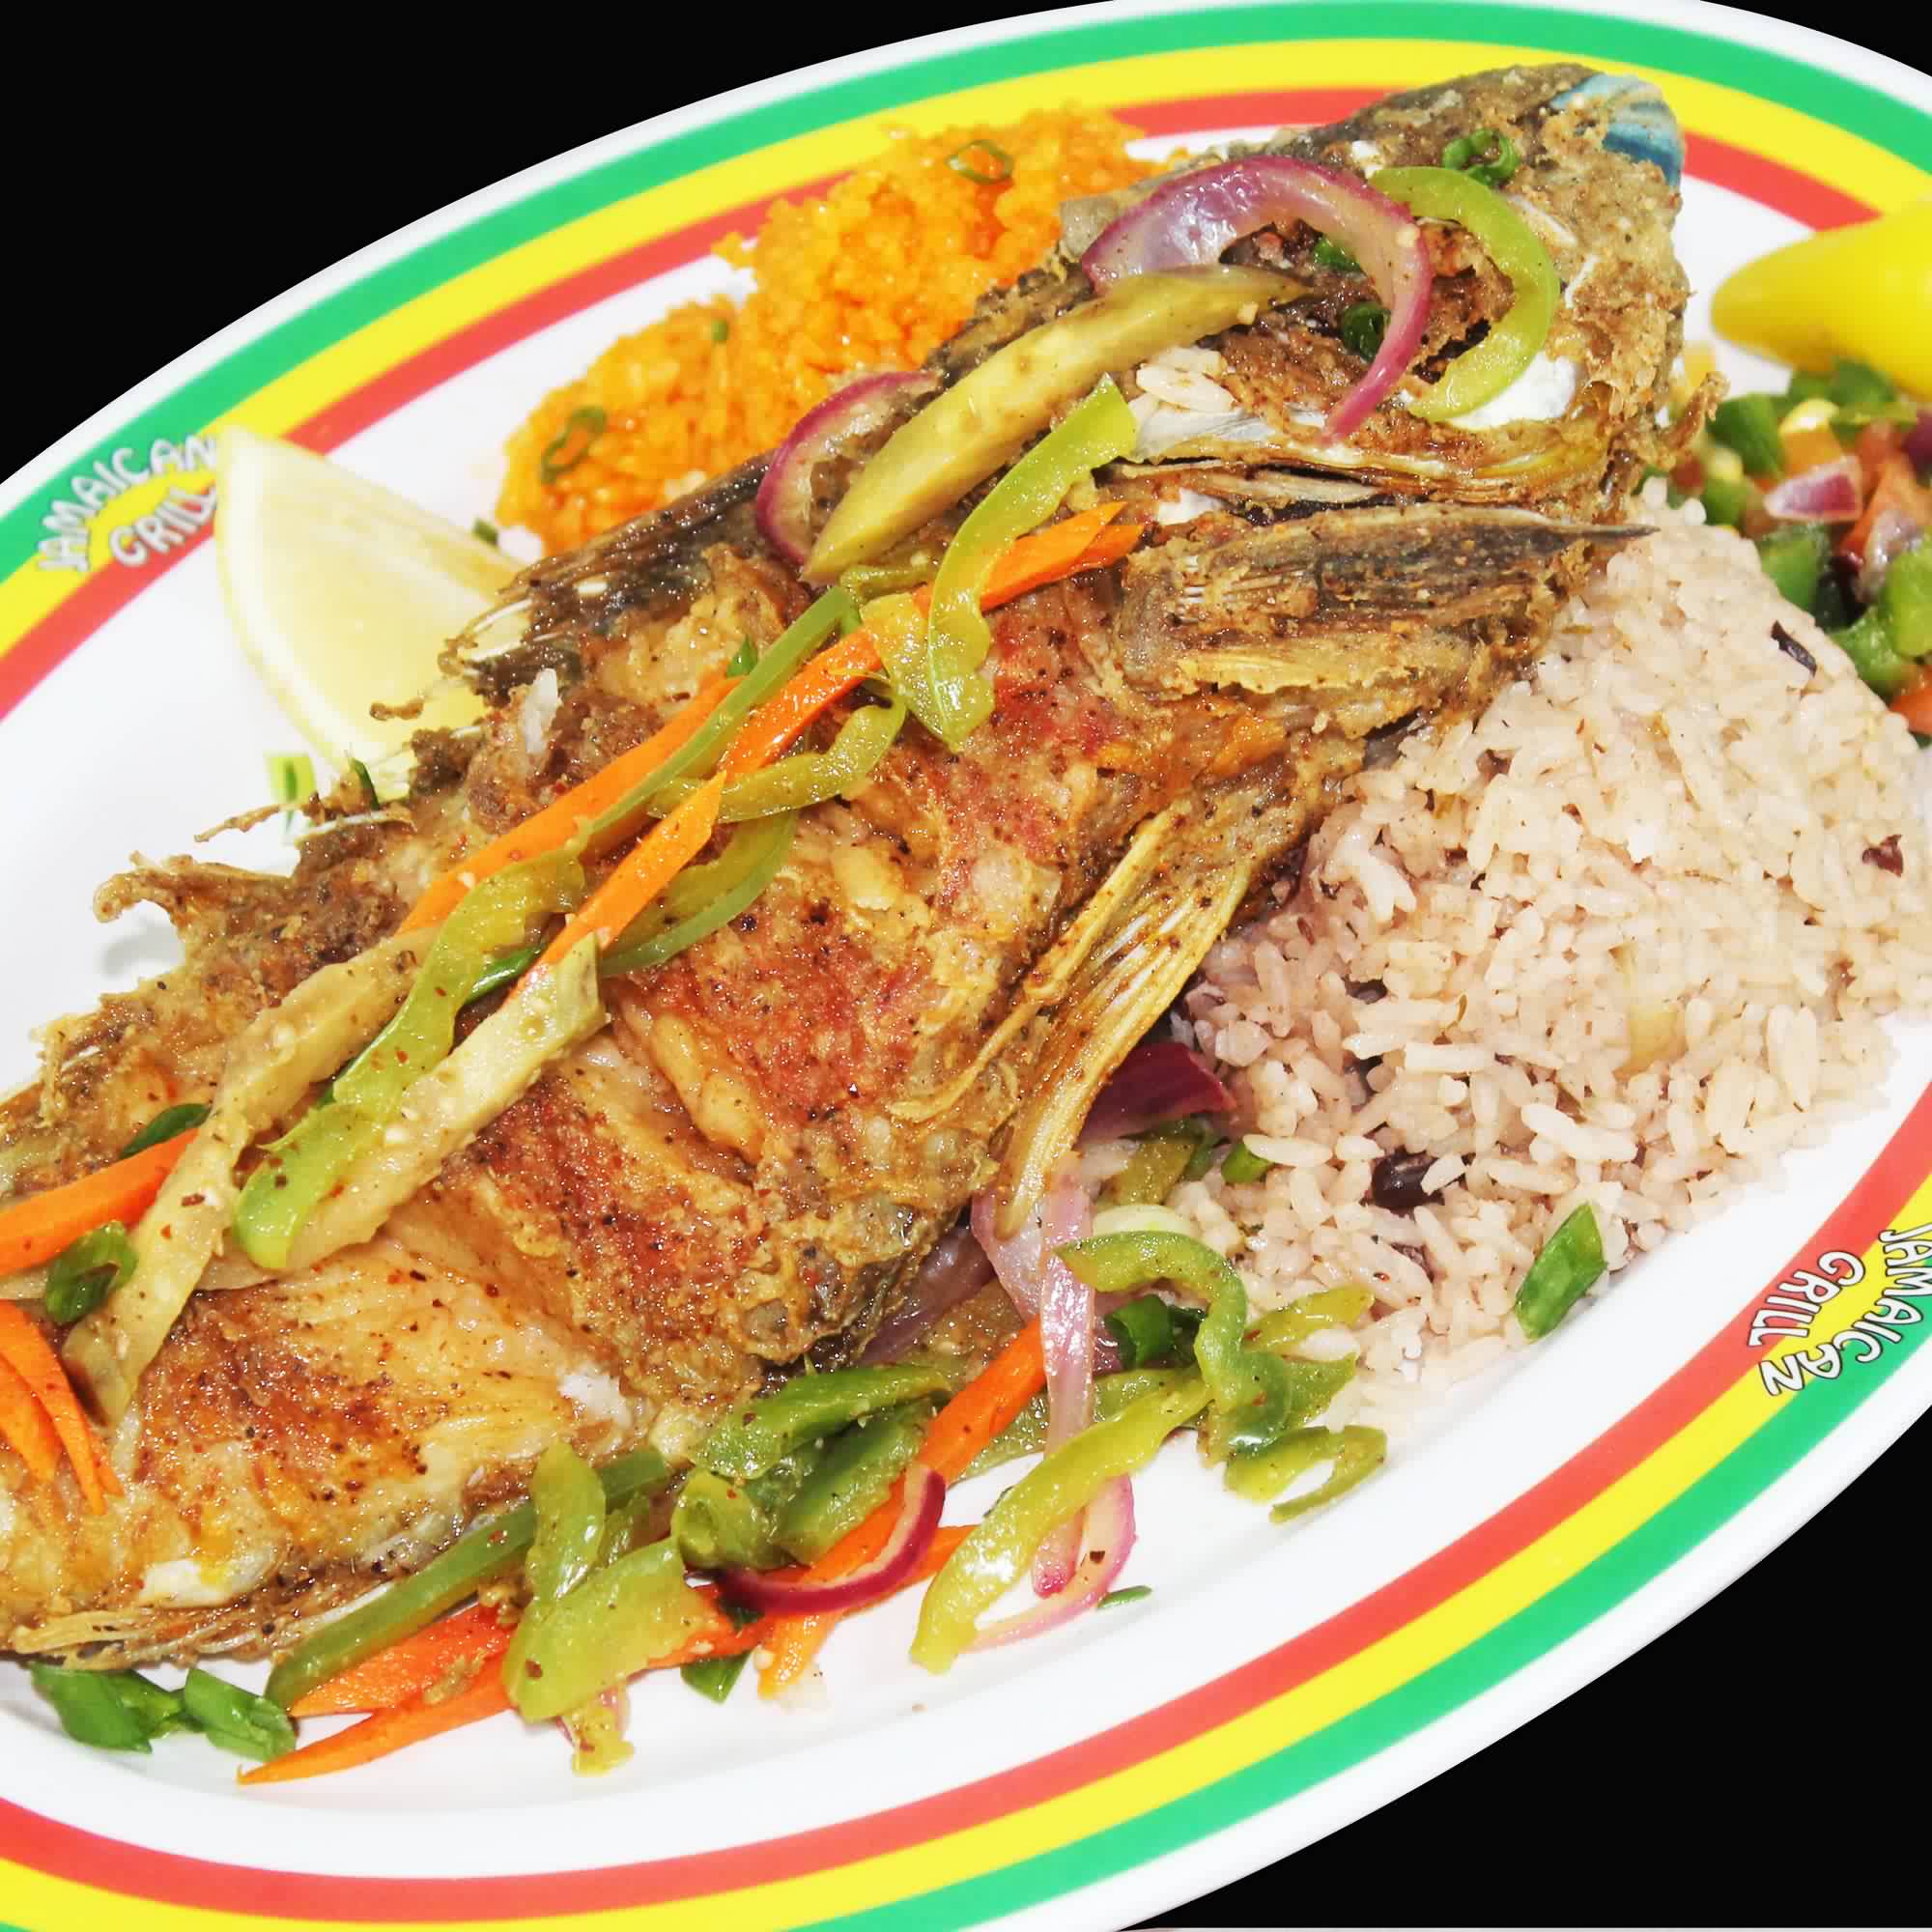 Deep-Fried &ldquo;Jerk&rdquo; Parrot Fish with Marinated Vegetables